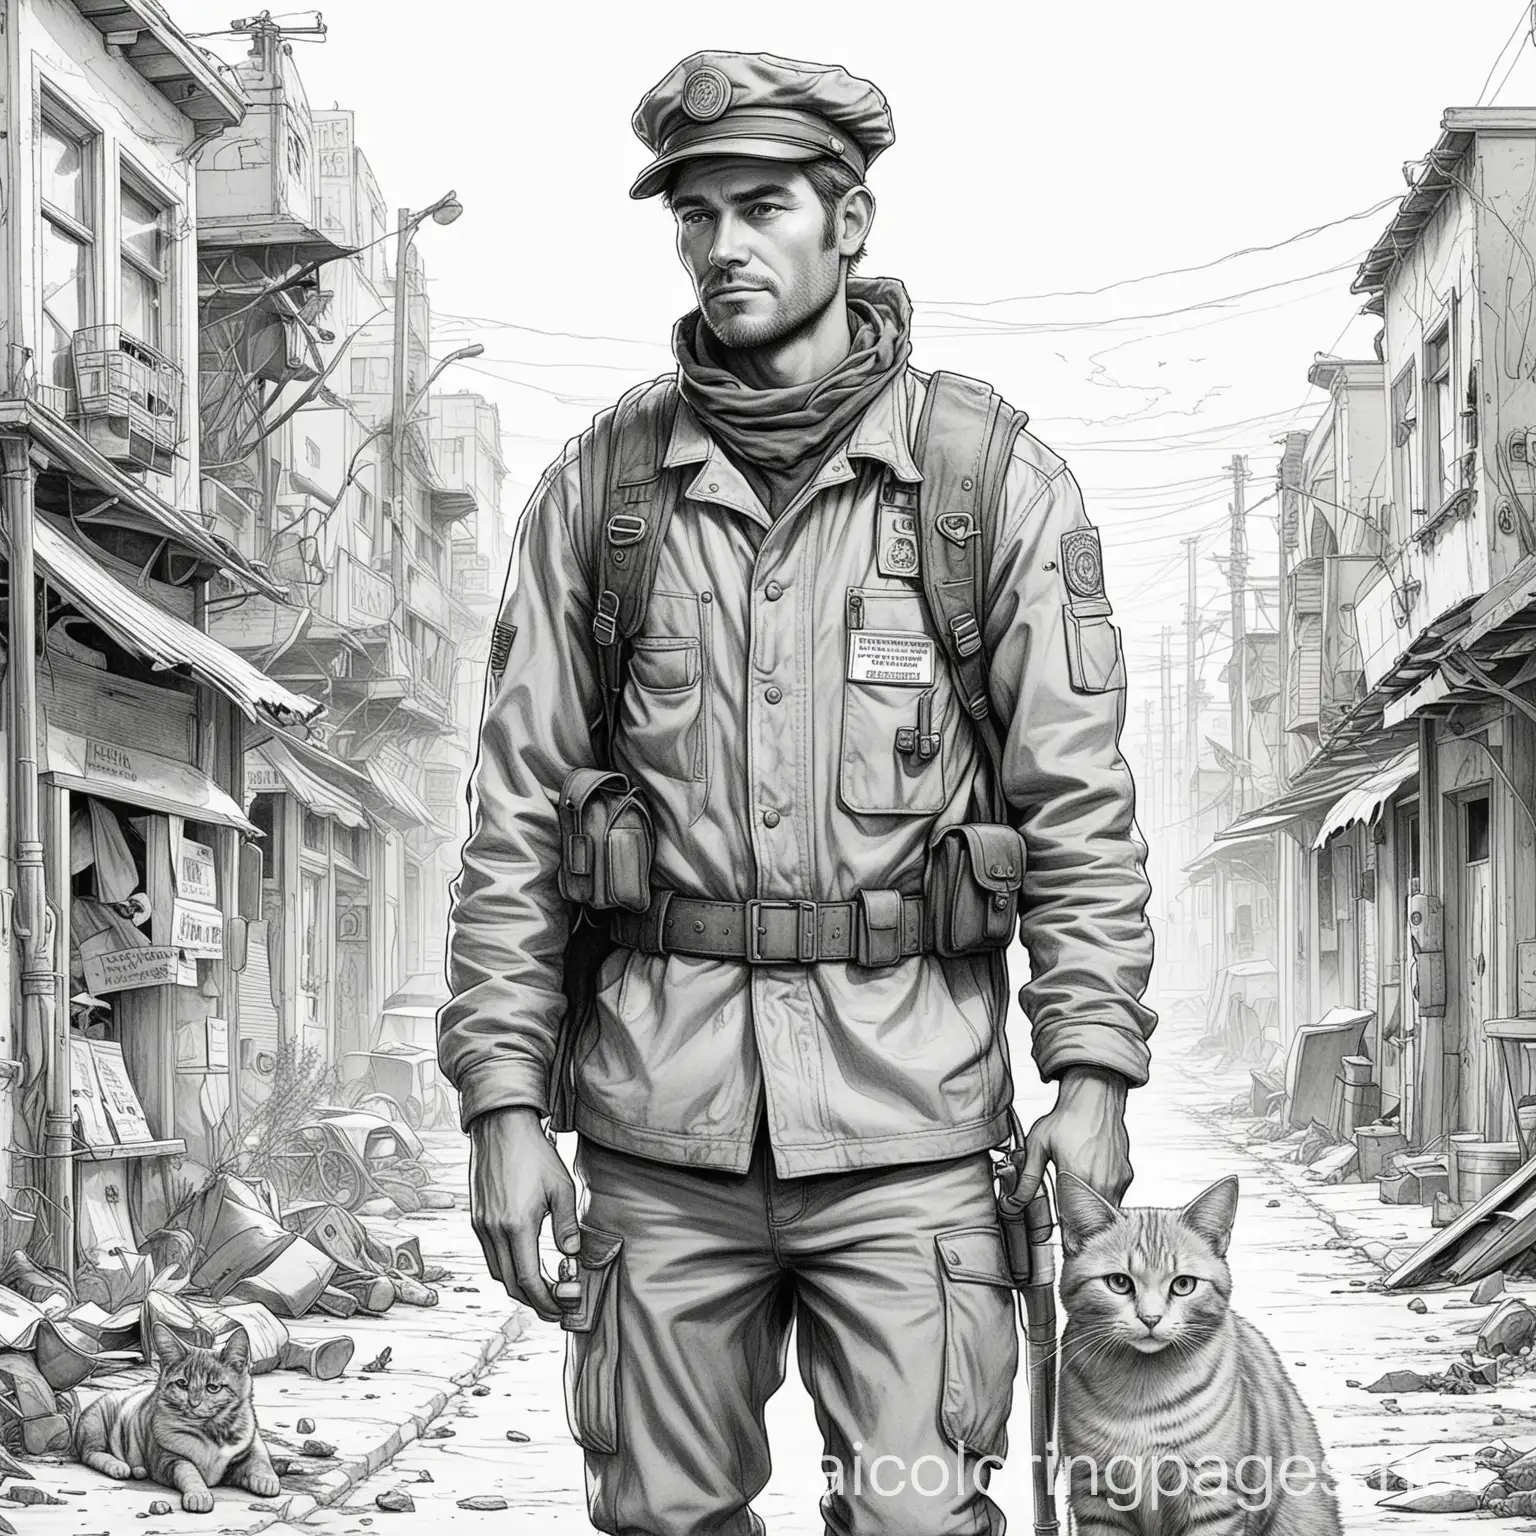 a mailman in a post-apocalypse future with his faithful sidekick cat, Coloring Page, black and white, line art, white background, Simplicity, Ample White Space. The background of the coloring page is plain white to make it easy for young children to color within the lines. The outlines of all the subjects are easy to distinguish, making it simple for kids to color without too much difficulty